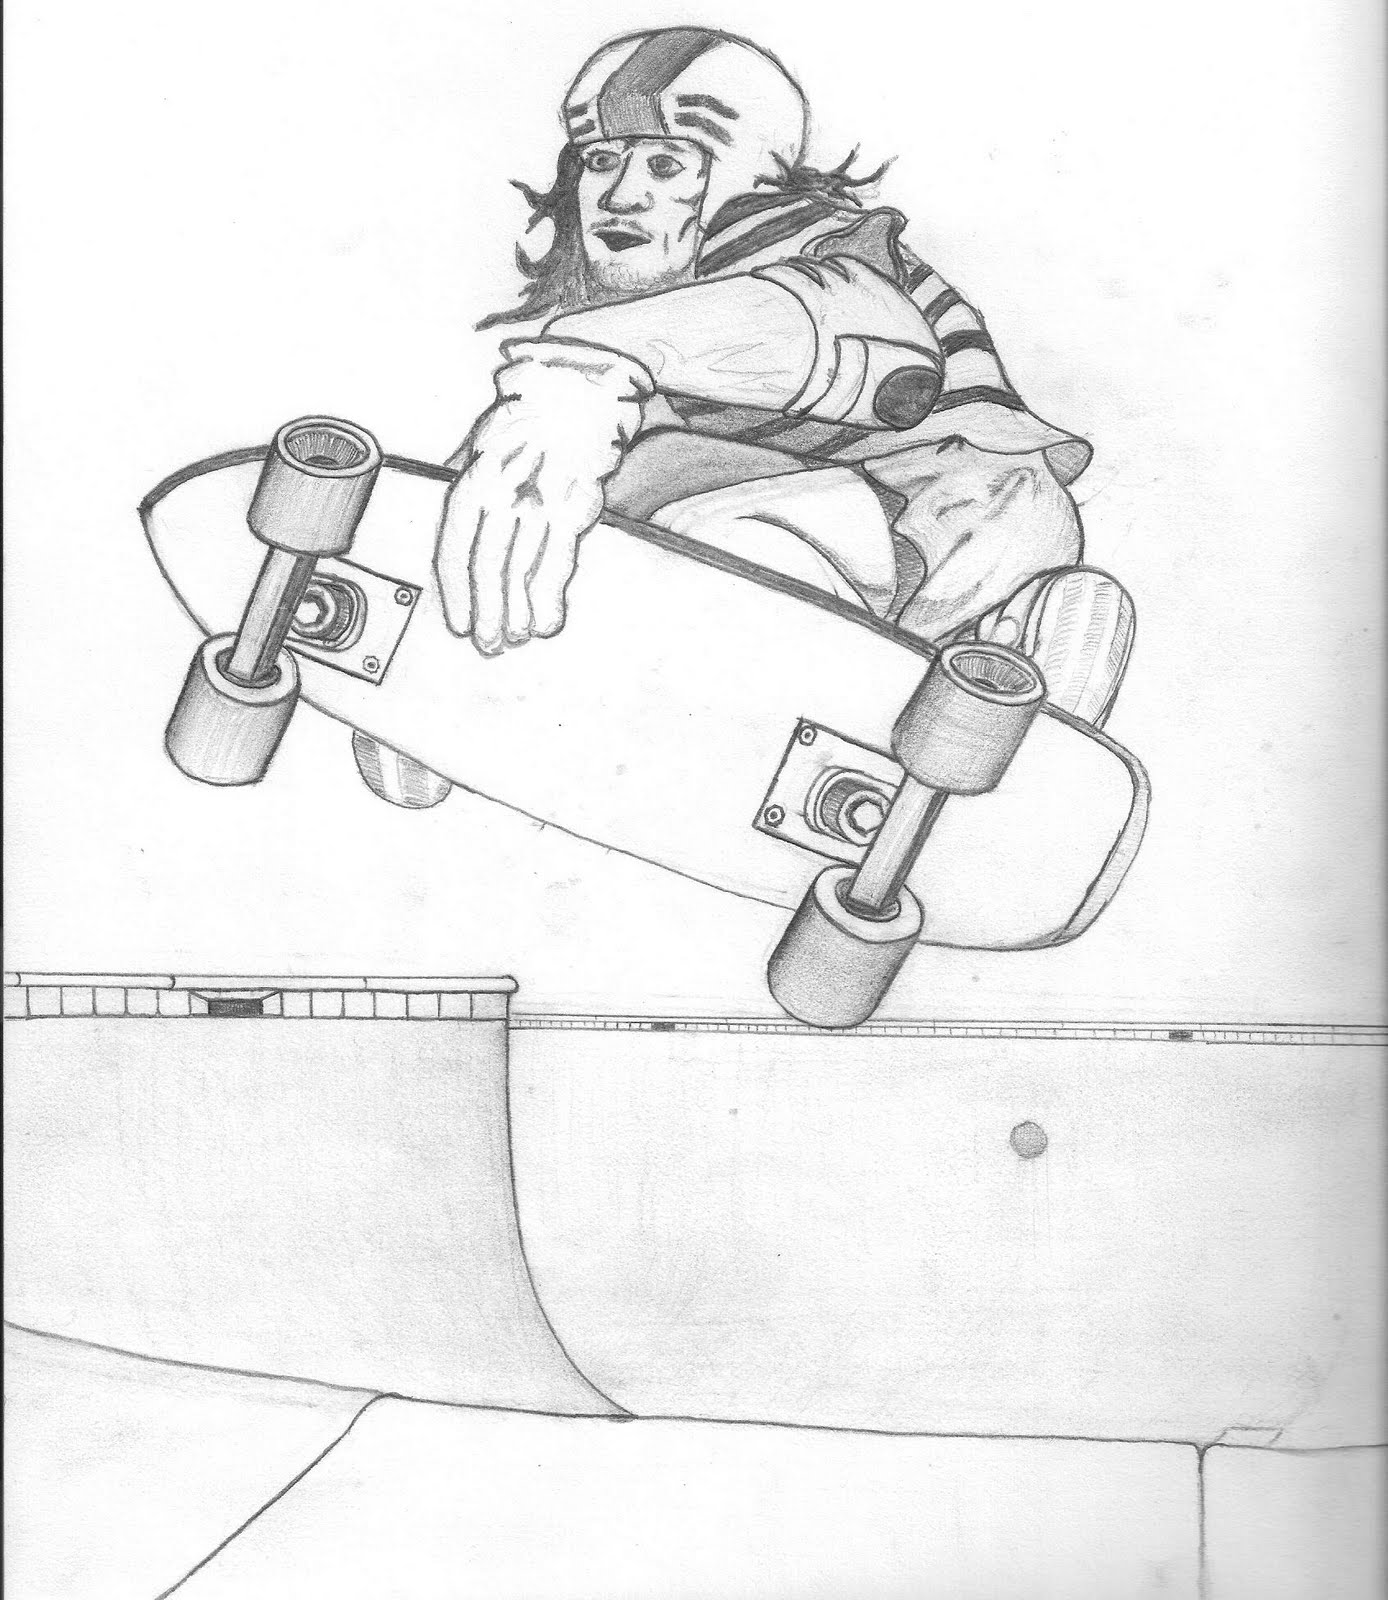 Skateboarding coloring page